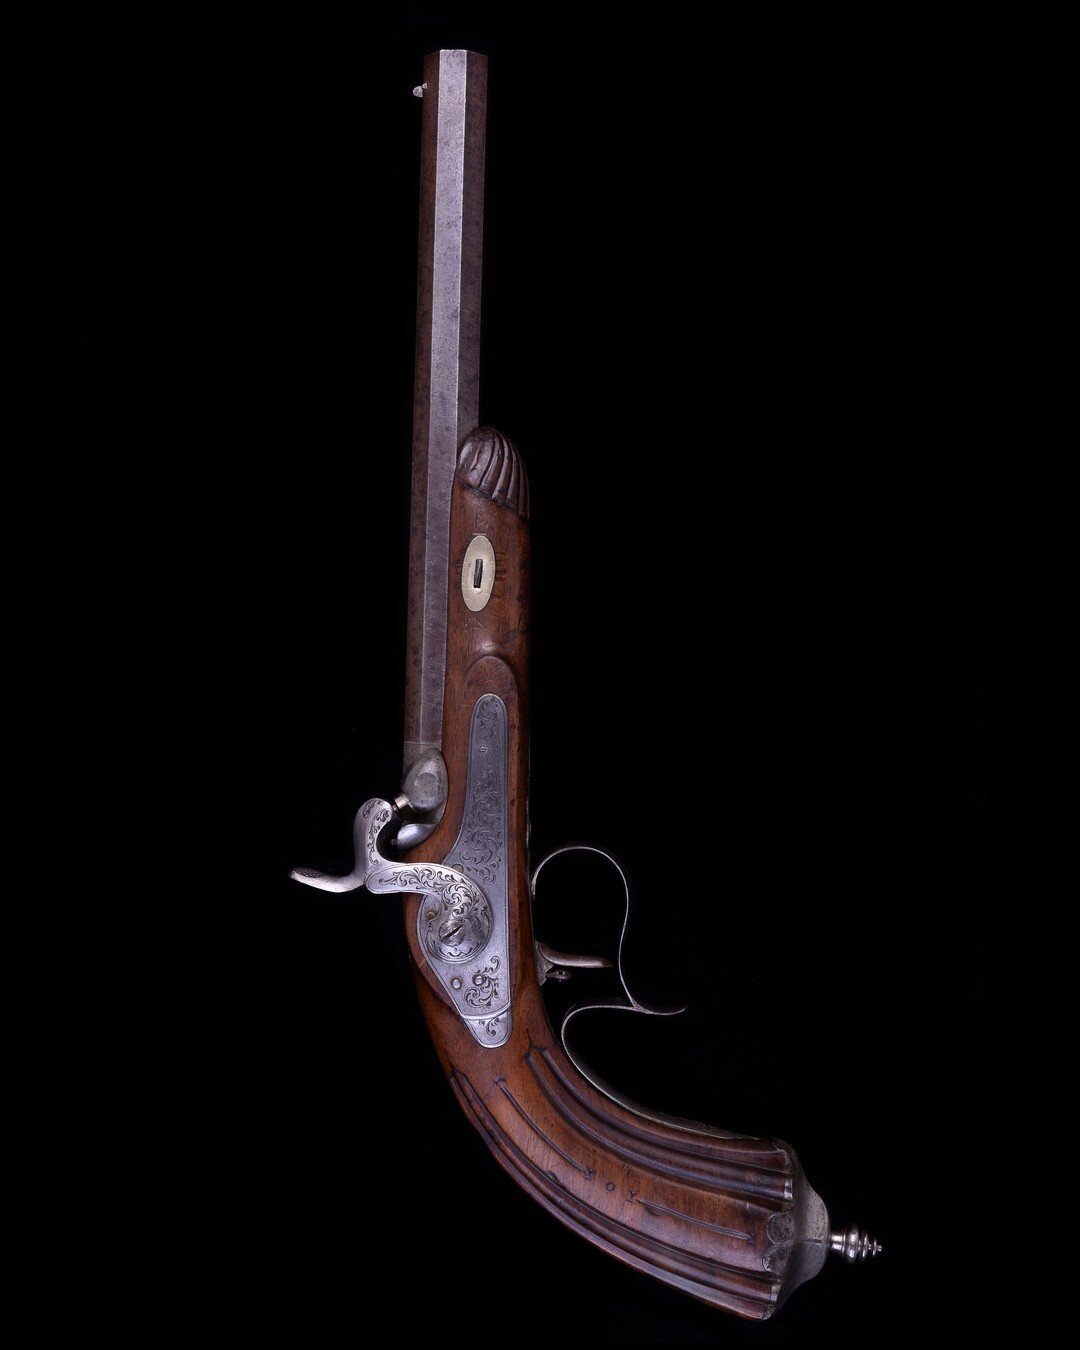 C1850 German Target Pistol &pound;680

A 19th Century ornate Belgian rifled percussion target pistol, probably made for the German market. It has a 24cm twisted, rifled, barrel with Liege ELG proof mark to the side. The engraved spur trigger guard ho